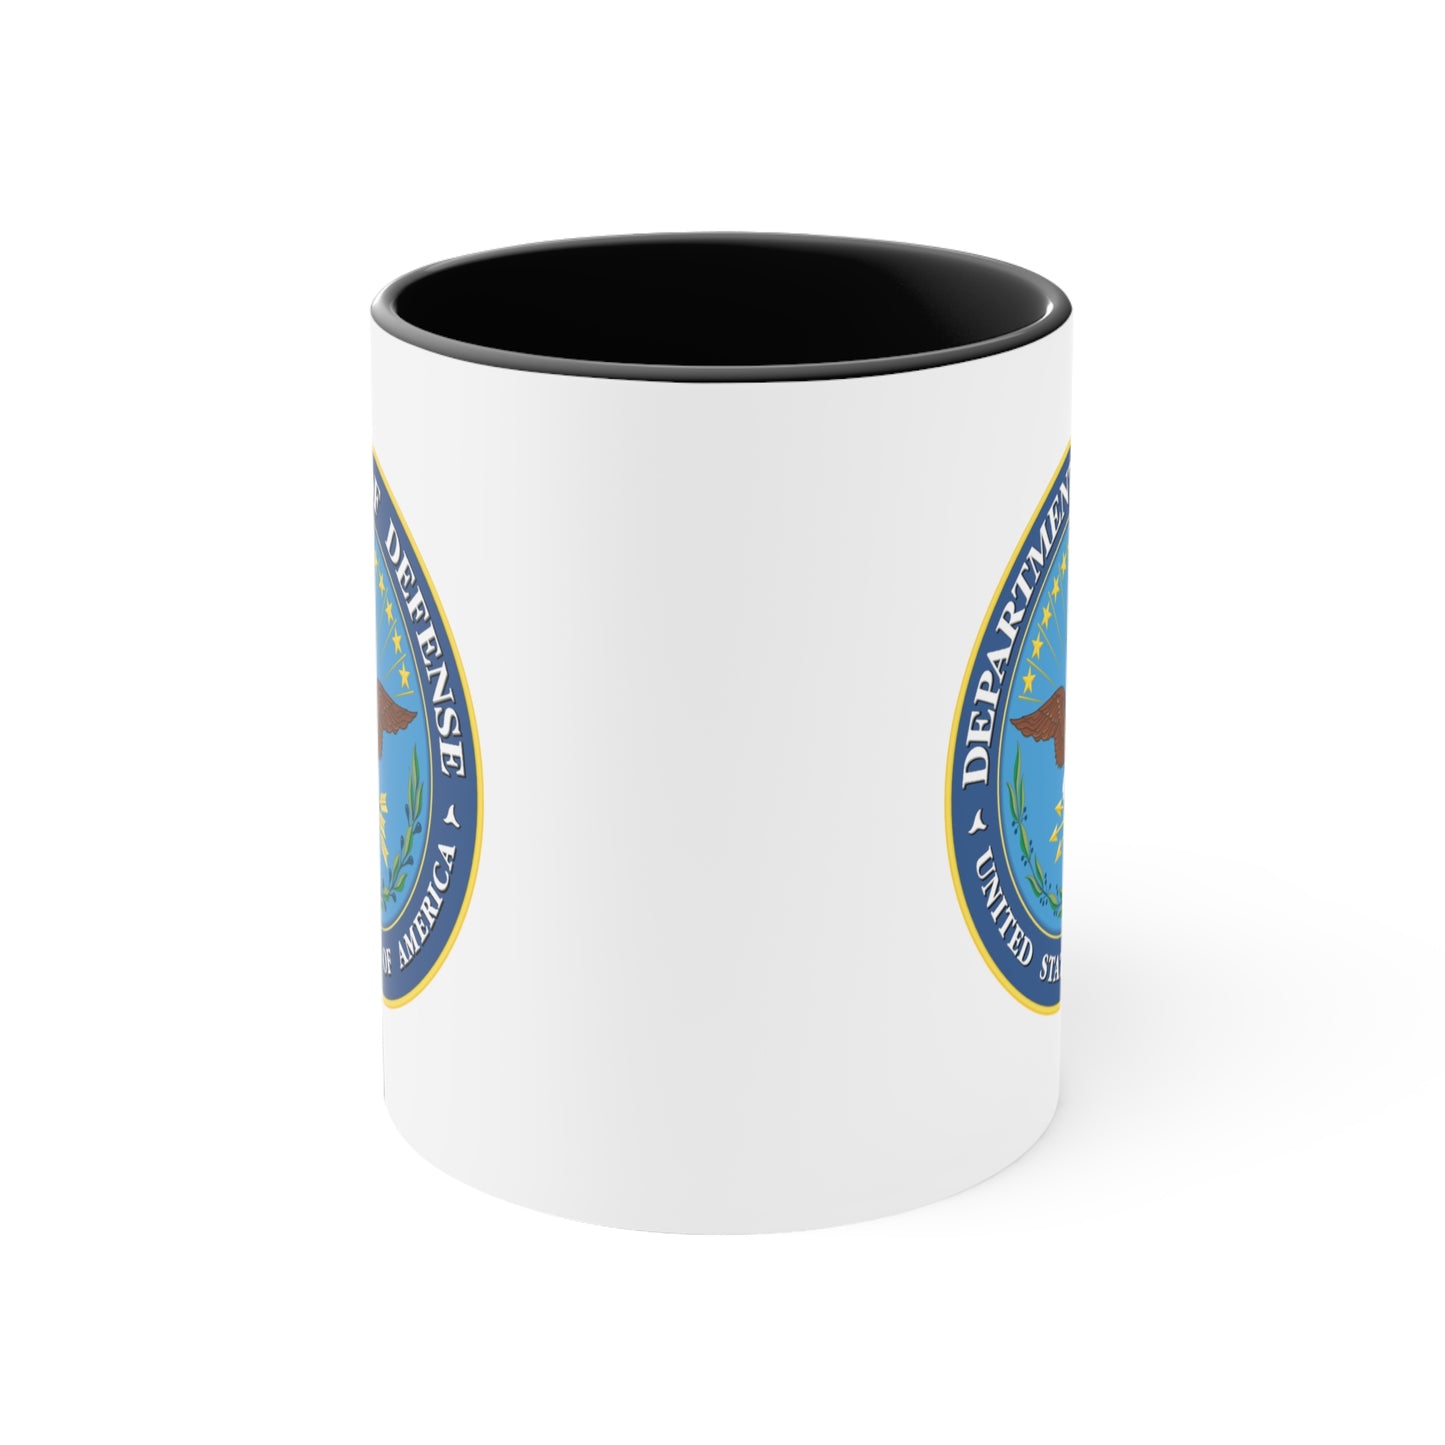 Department of Defense Coffee Mug - Double Sided Black Accent White Ceramic 11oz by TheGlassyLass.com